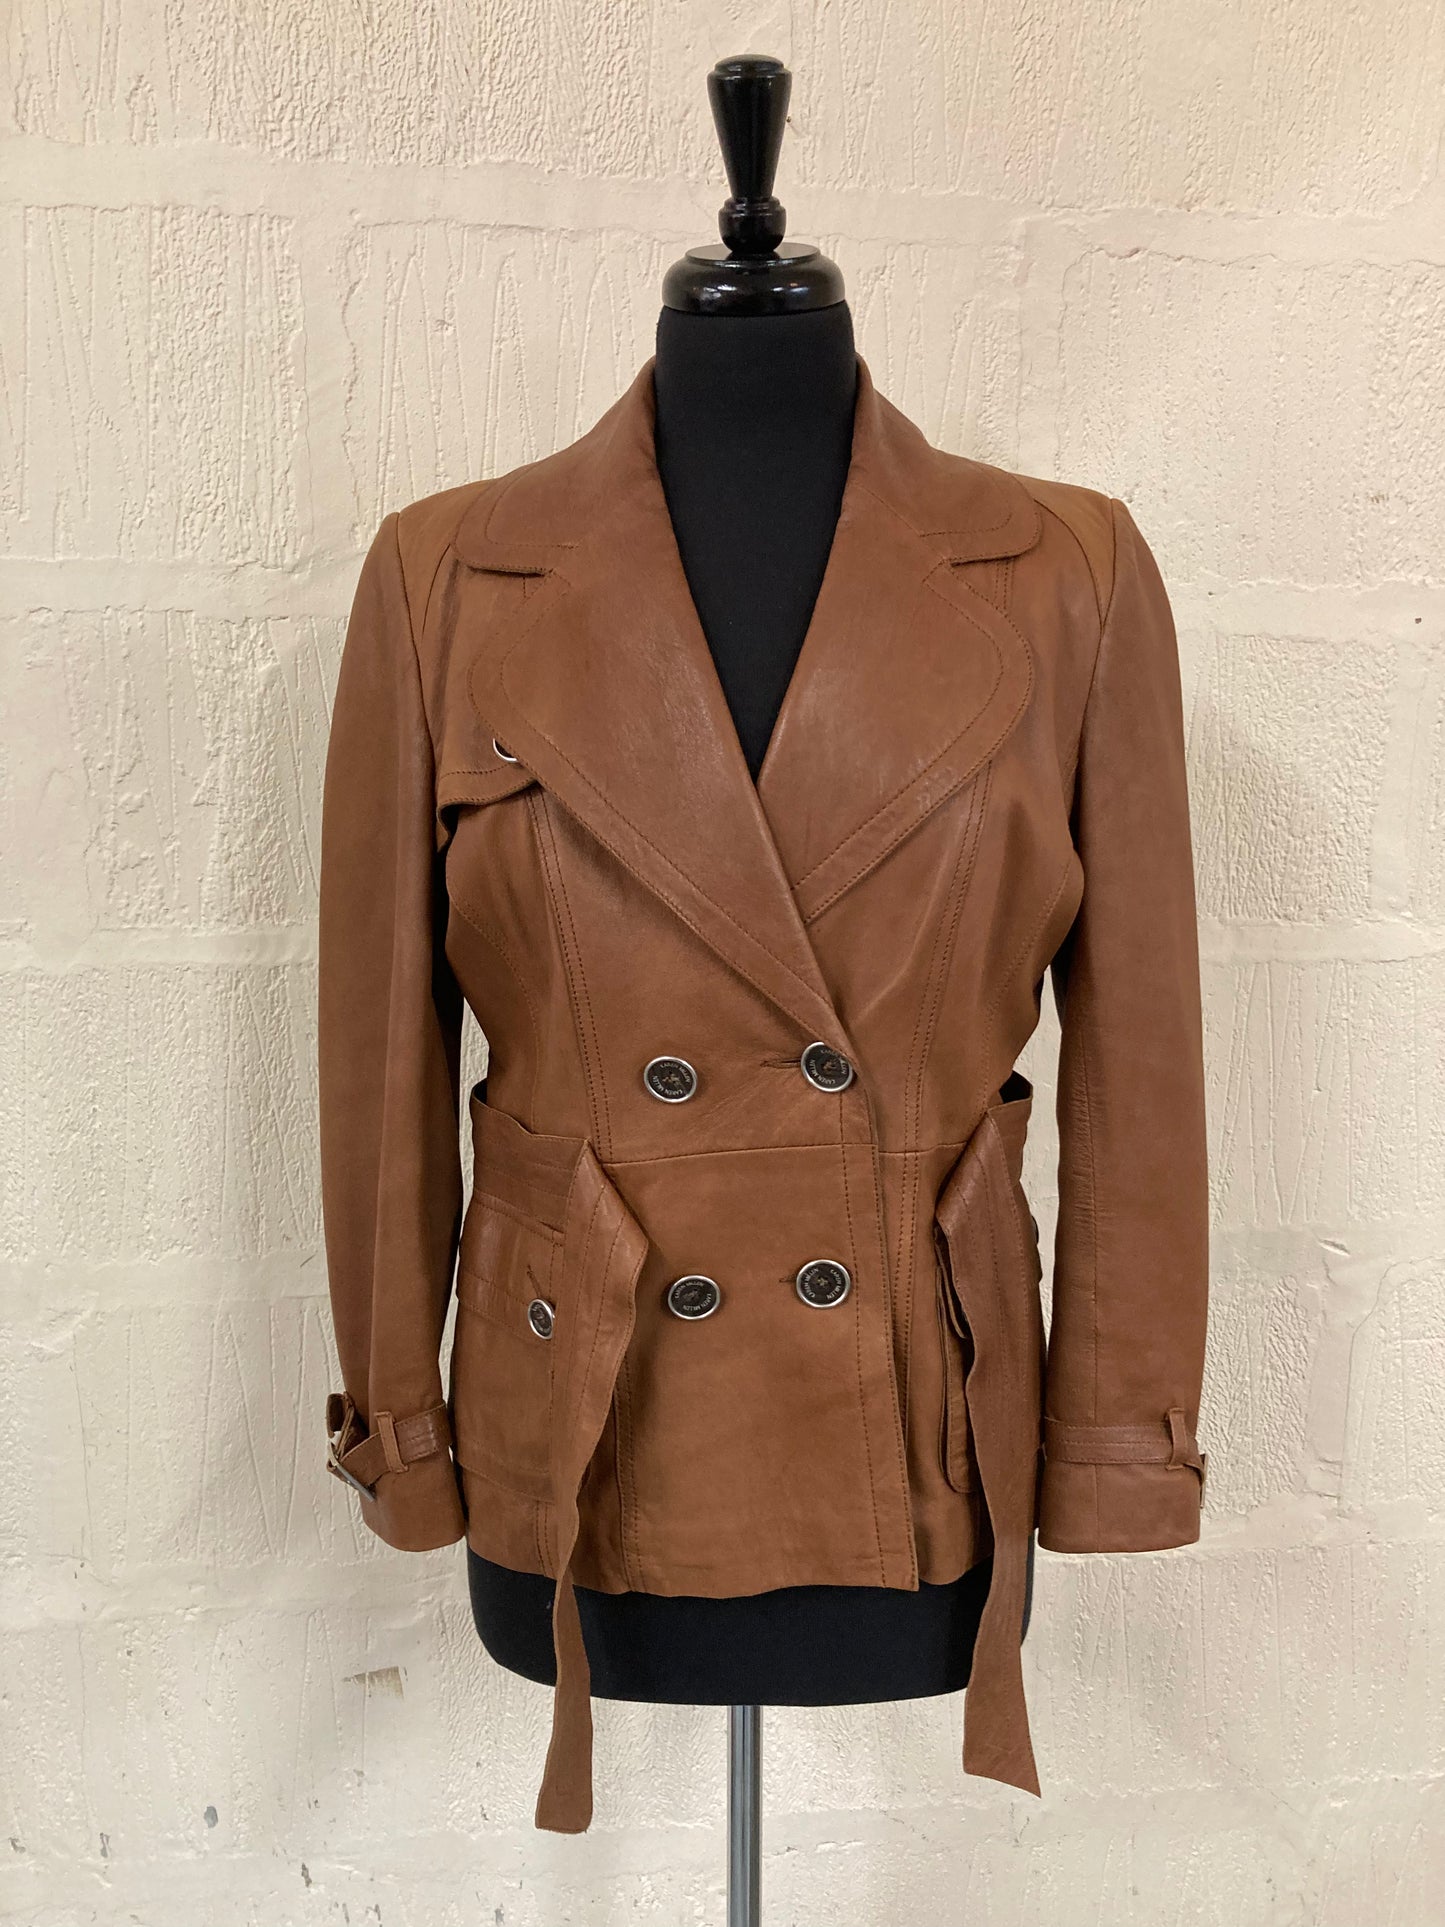 1970s style Karen Millen Tan Leather Double Breasted Belted Jacket Size 12